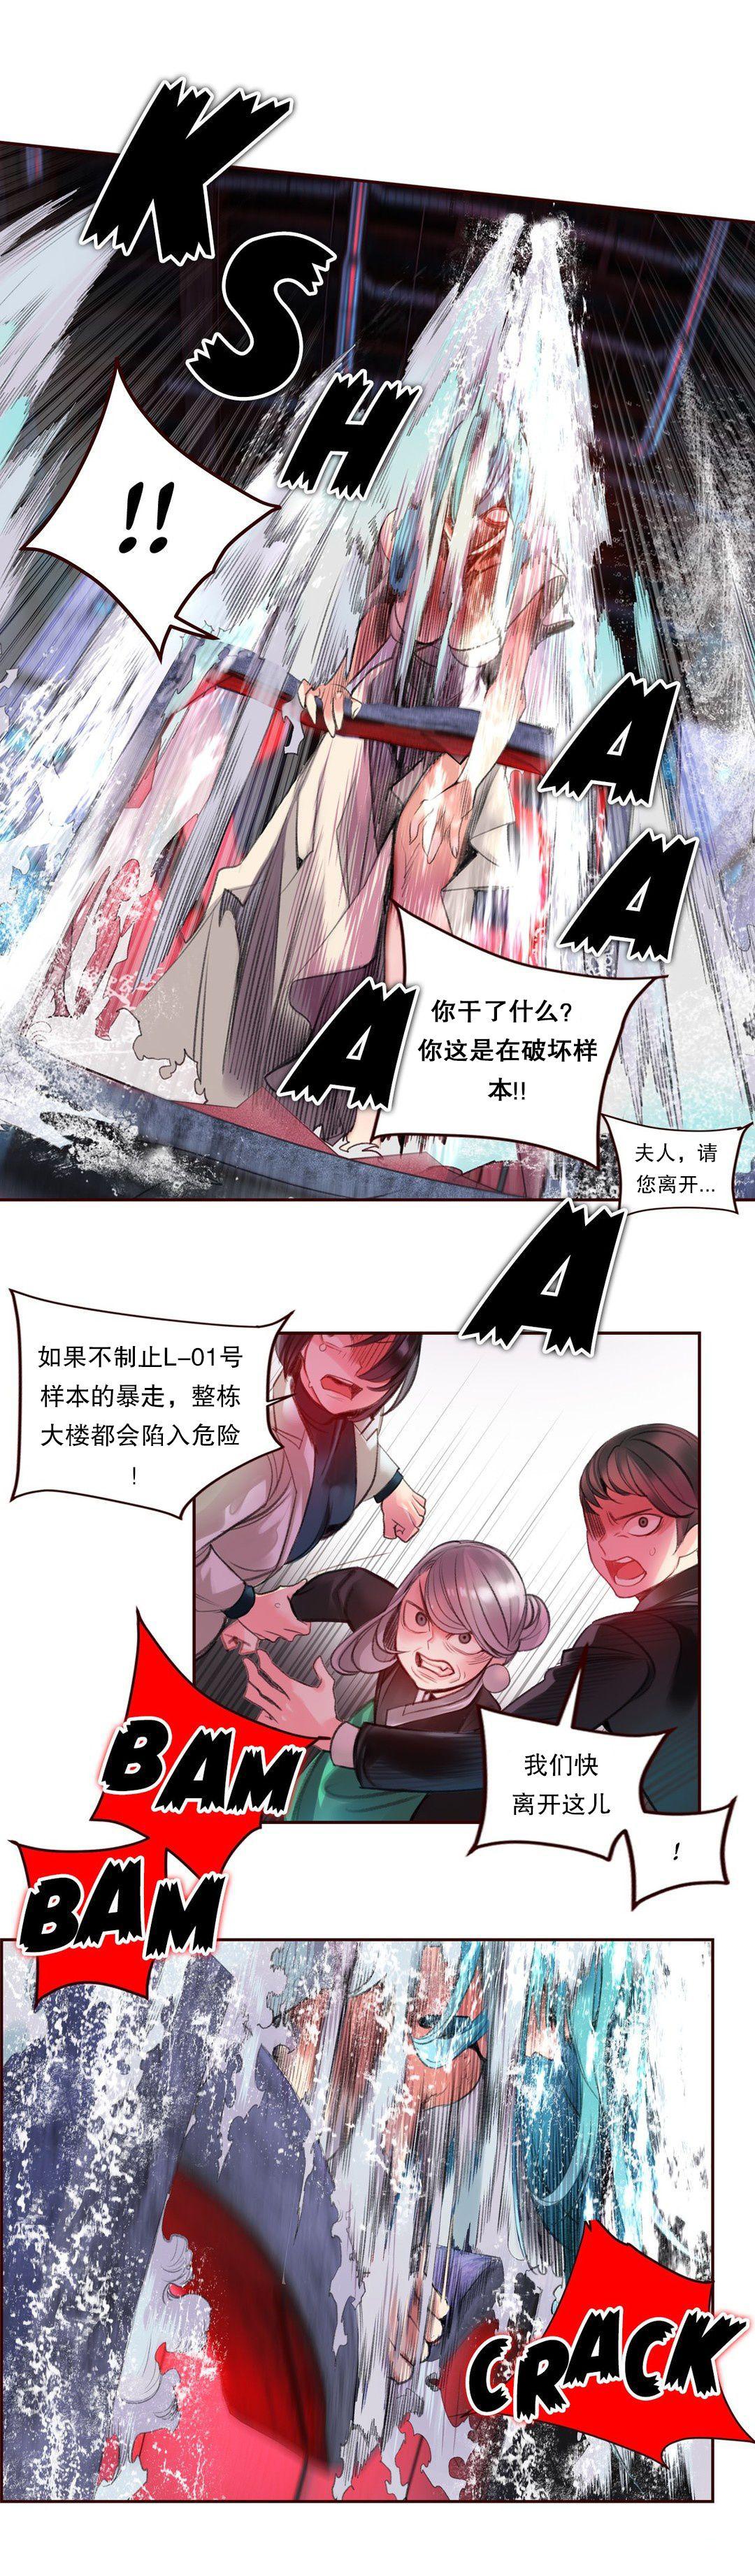 [Juder] Lilith`s Cord (第二季) Ch.61-63 [Chinese] [aaatwist个人汉化] [Ongoing] 62